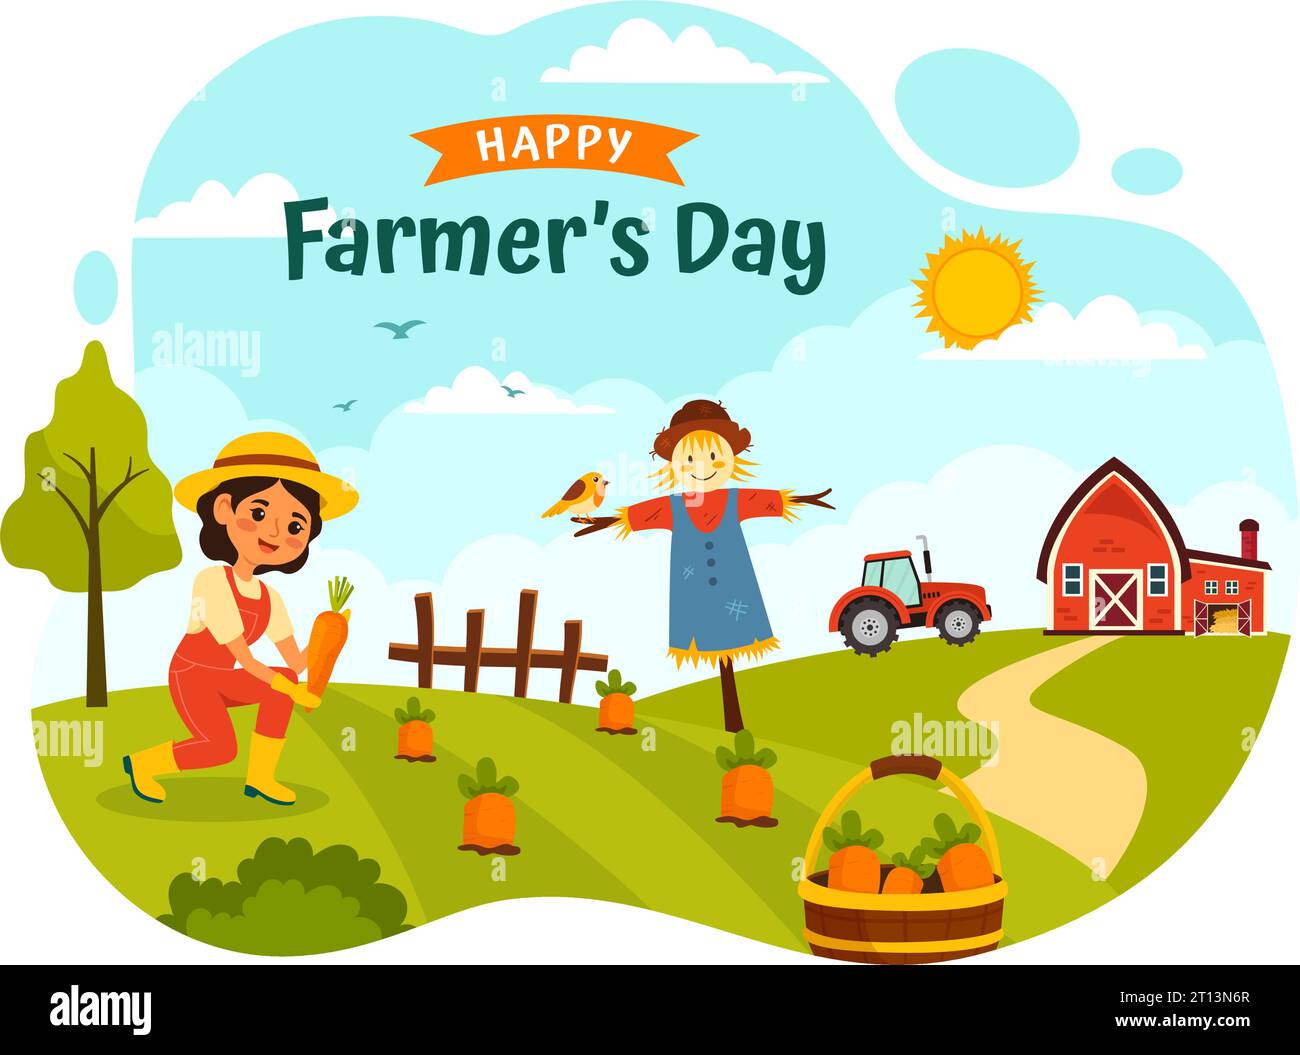 Happy Farmers' Day Vector Illustration on December 23 Rice Fields and Farmers Suitable for Poster or Landing Page in Flat Cartoon Background Design Stock Vector